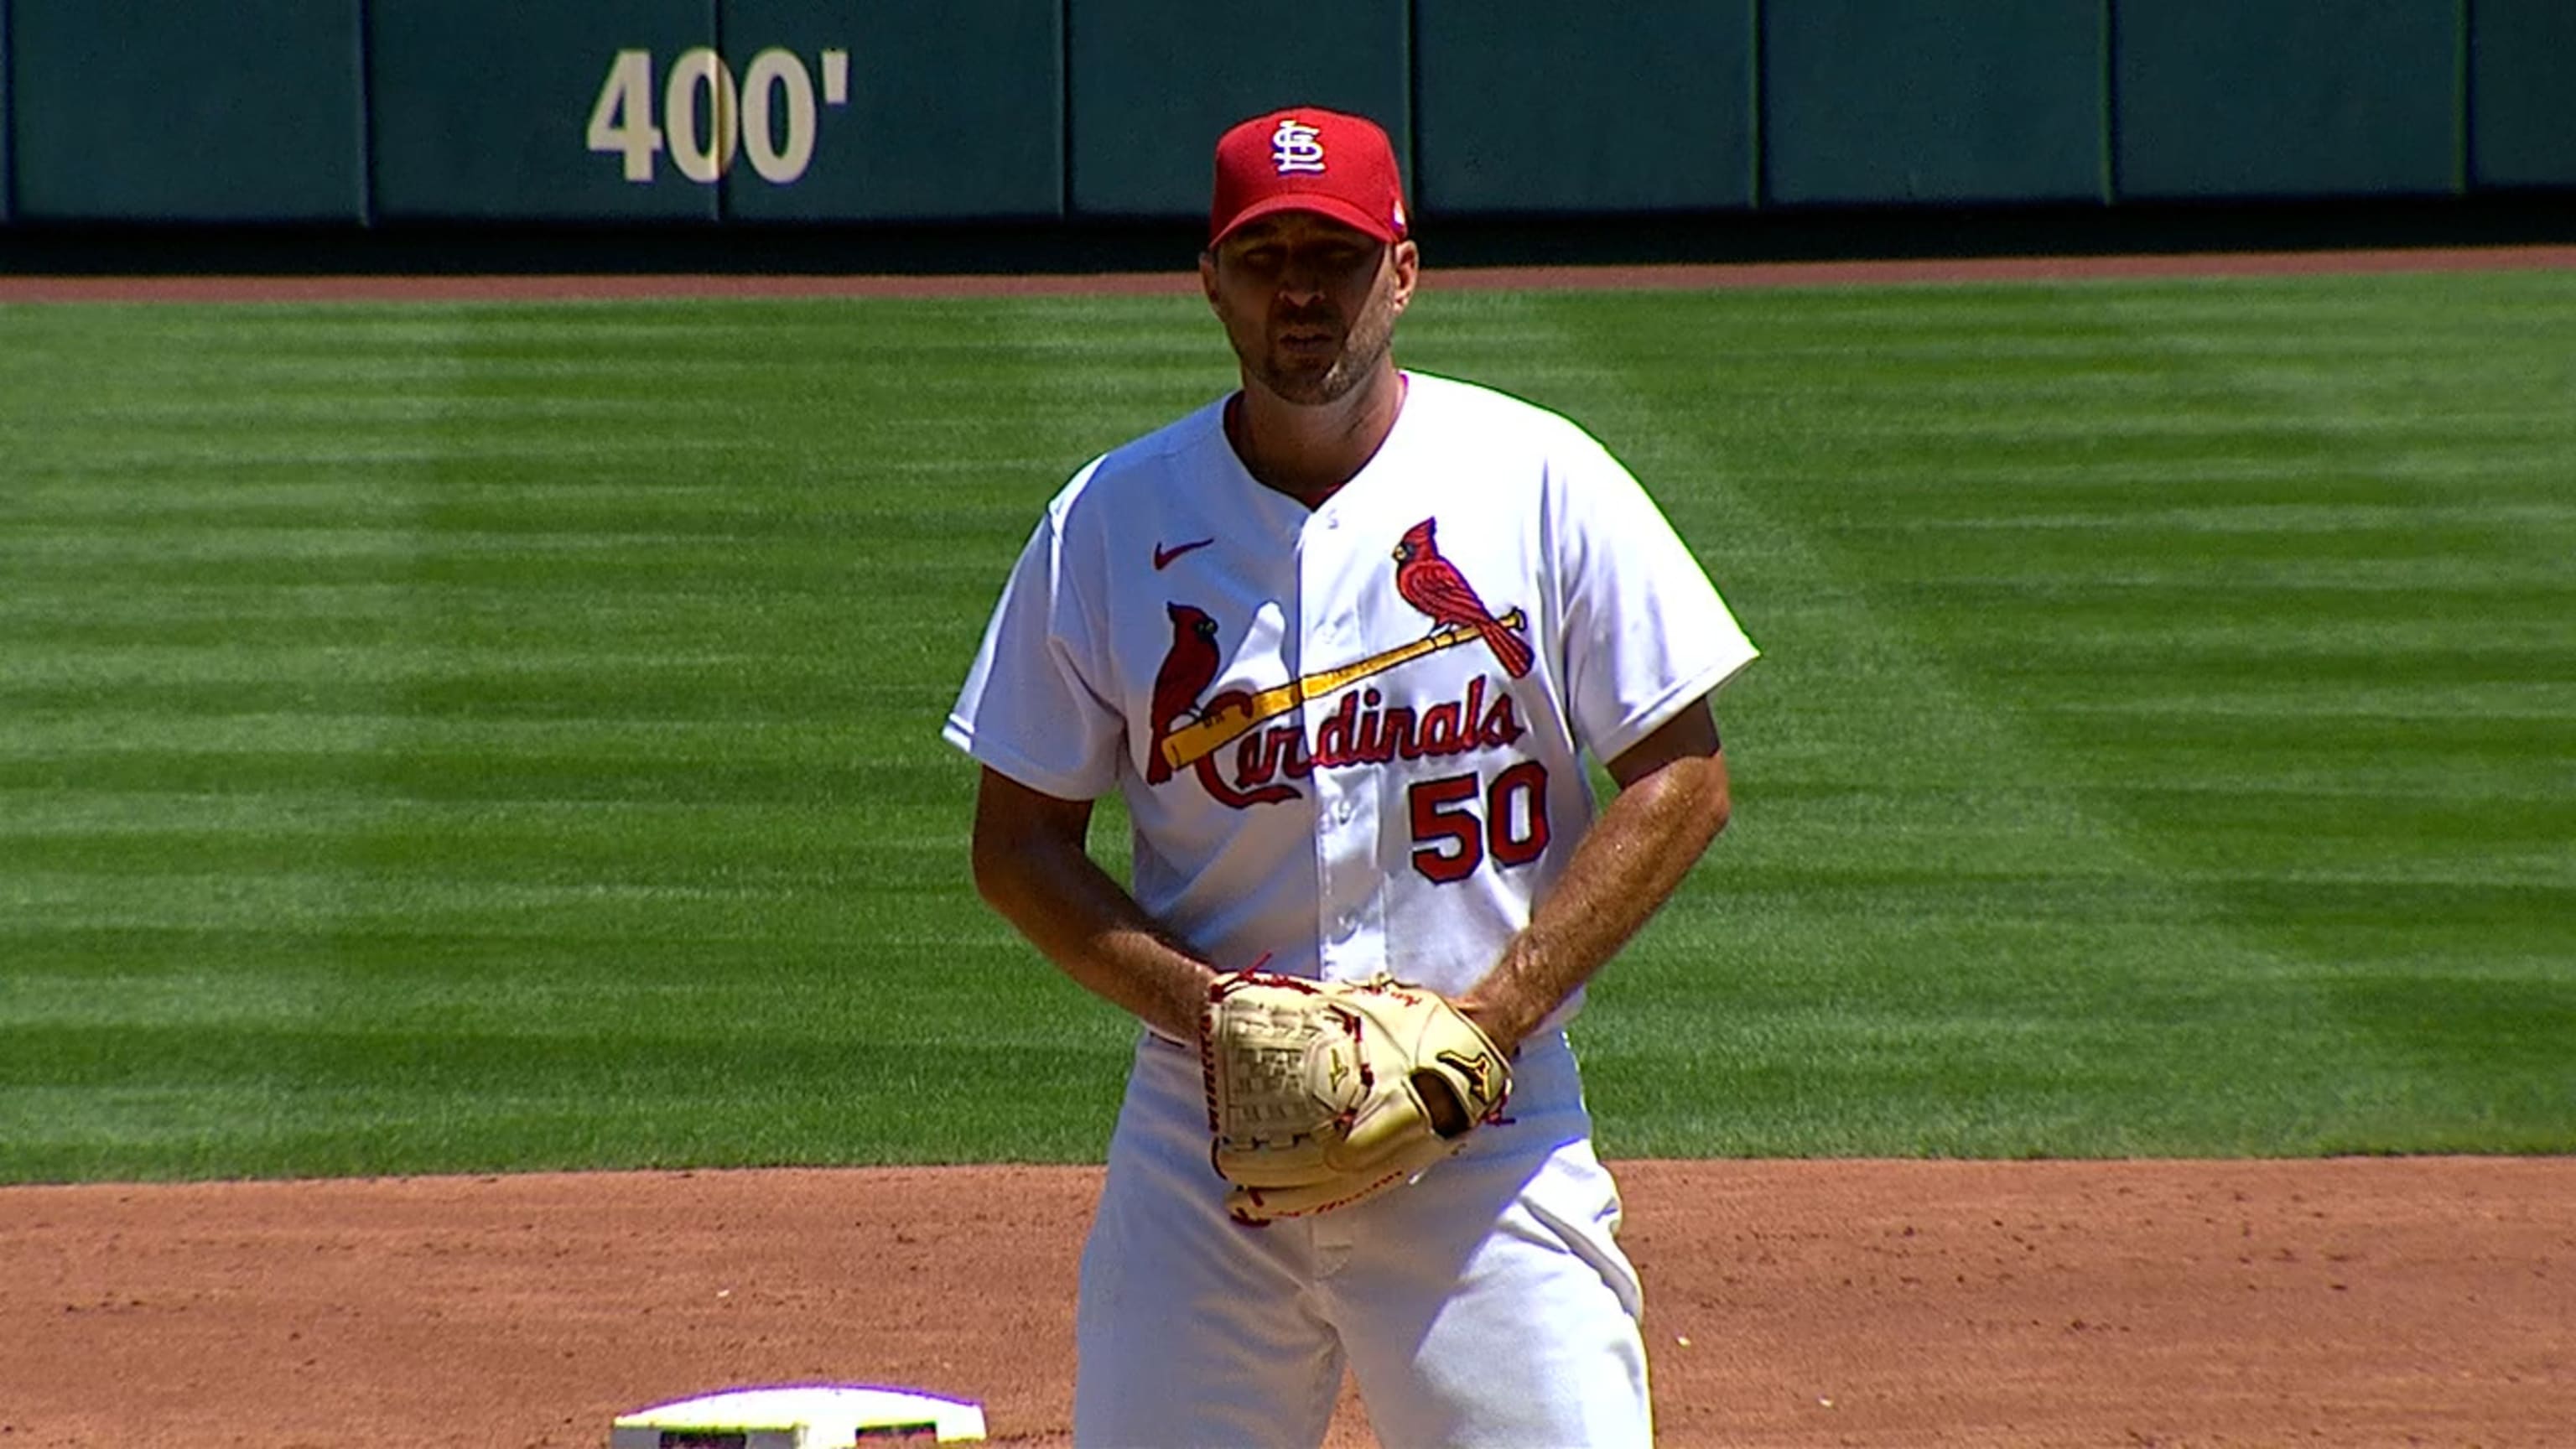 Pujols makes pitching debut, Cards offense catches fire in 15-6